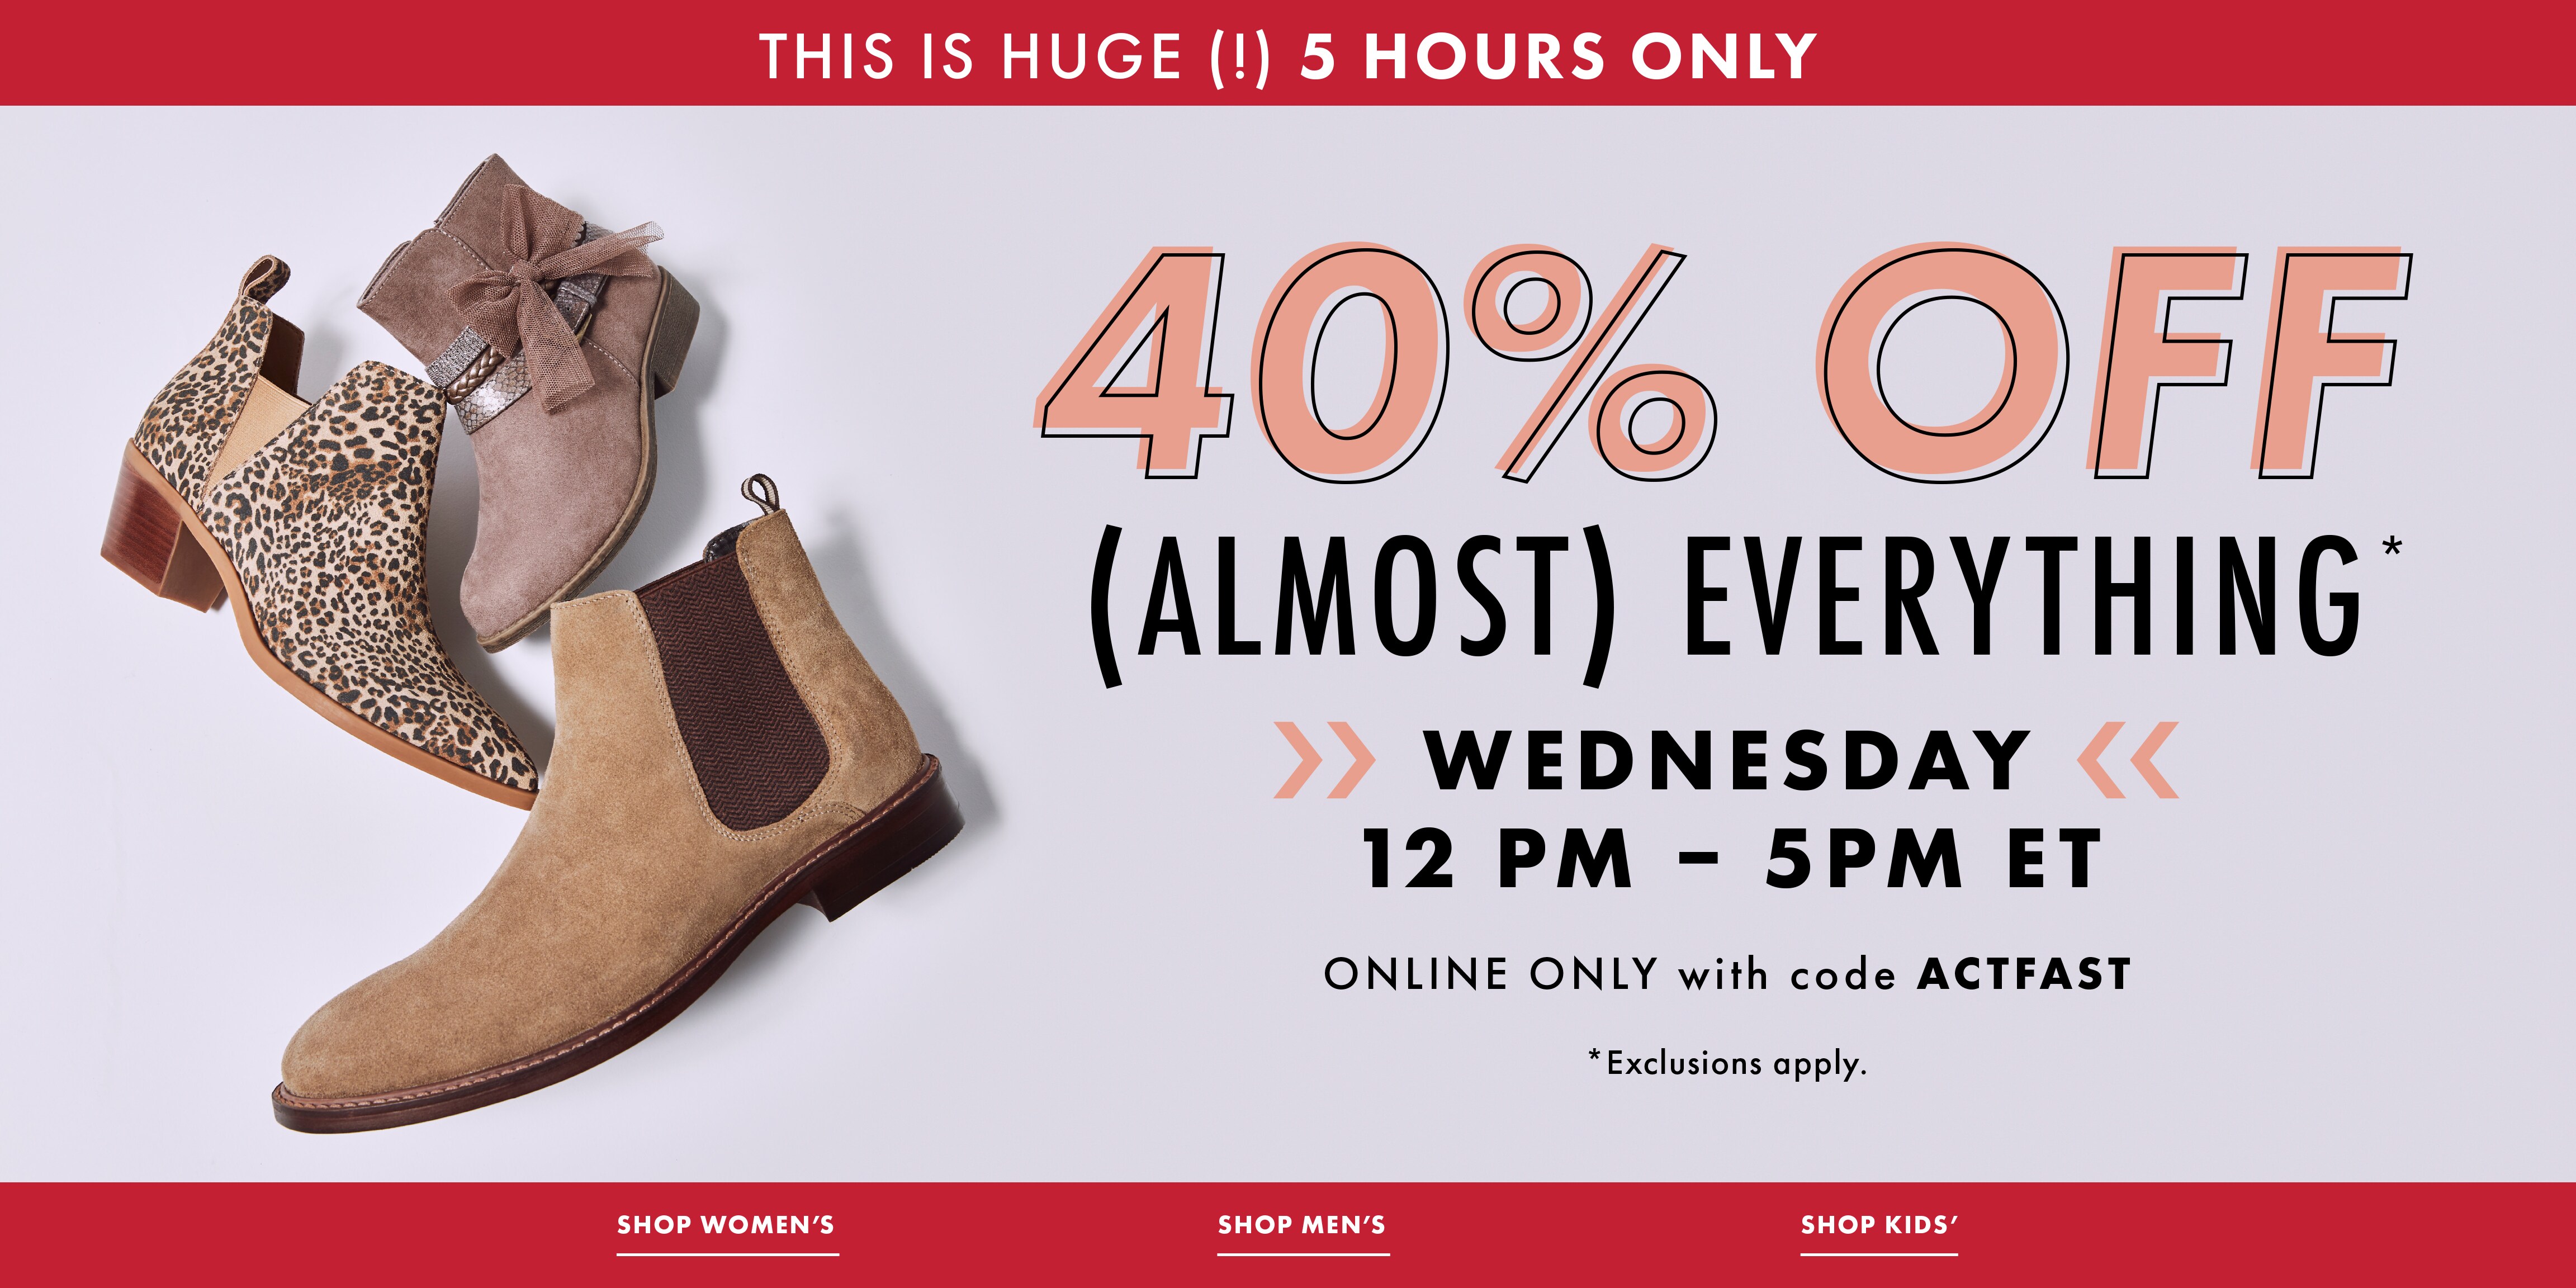 This is huge (!) 5 hours only: 40% off (almost) everything* >>Wednesday<< 12pm-5p ET. Online only with code ACTFAST.*Exclusions apply. Click to shop women's, men's, and kids'.